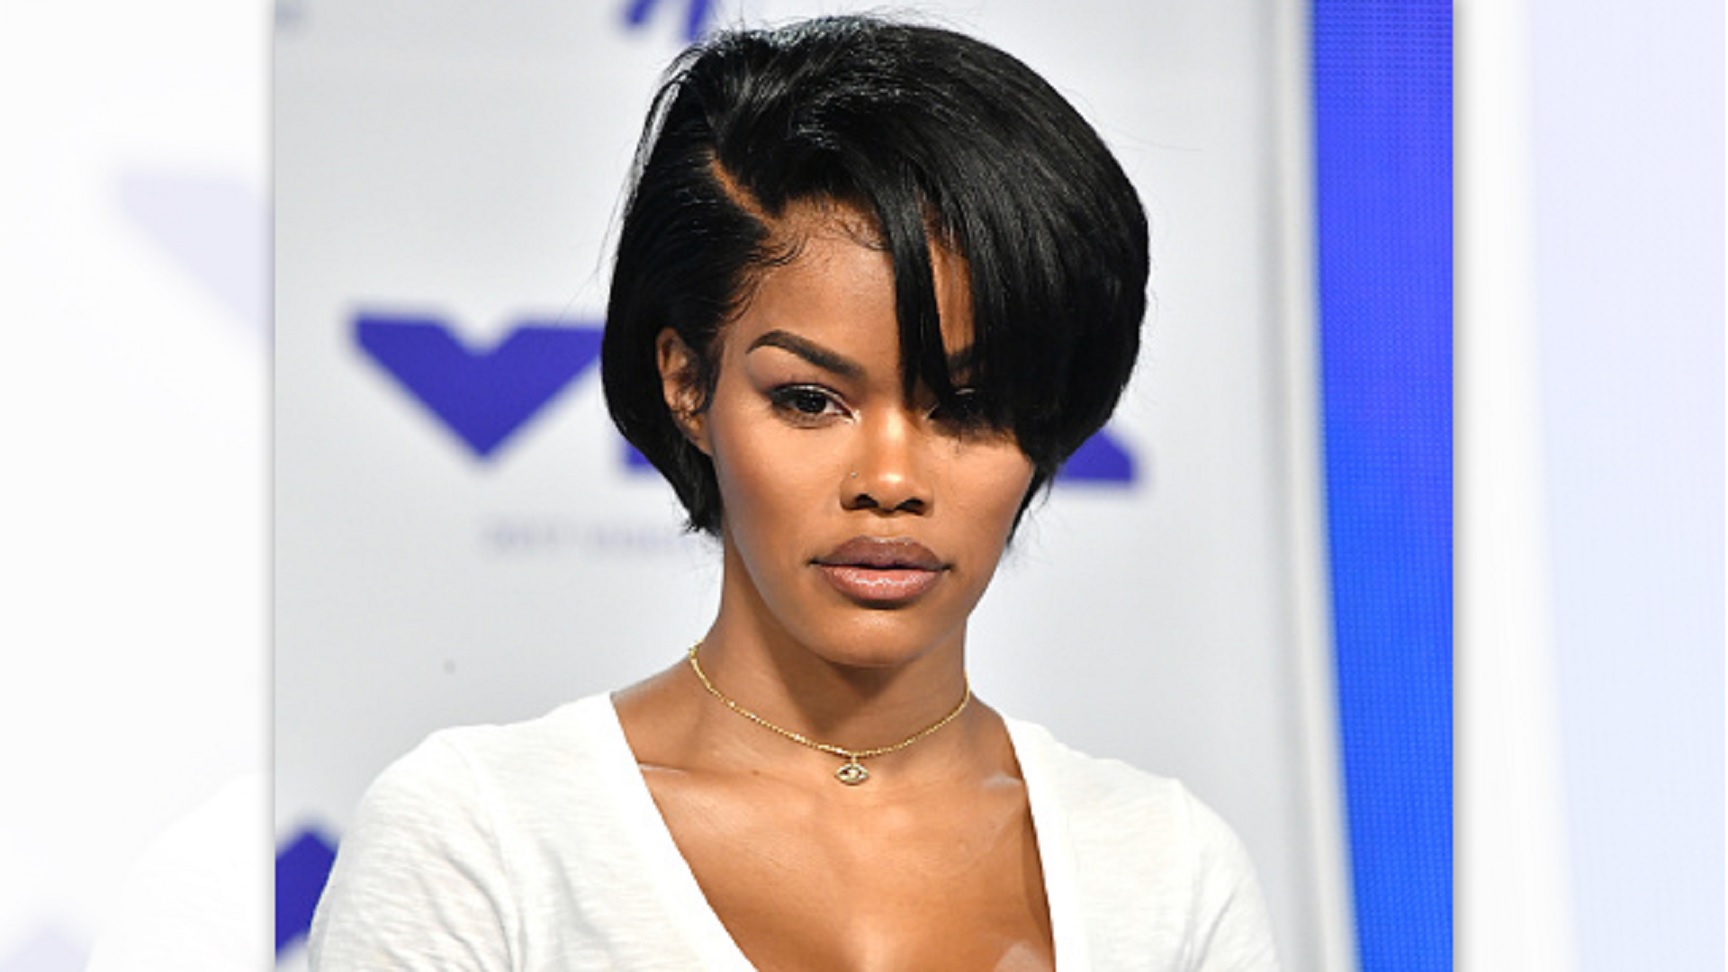 Teyana Taylor Announces Retirement From Showbiz, Says She Feels ‘Under Appreciated’